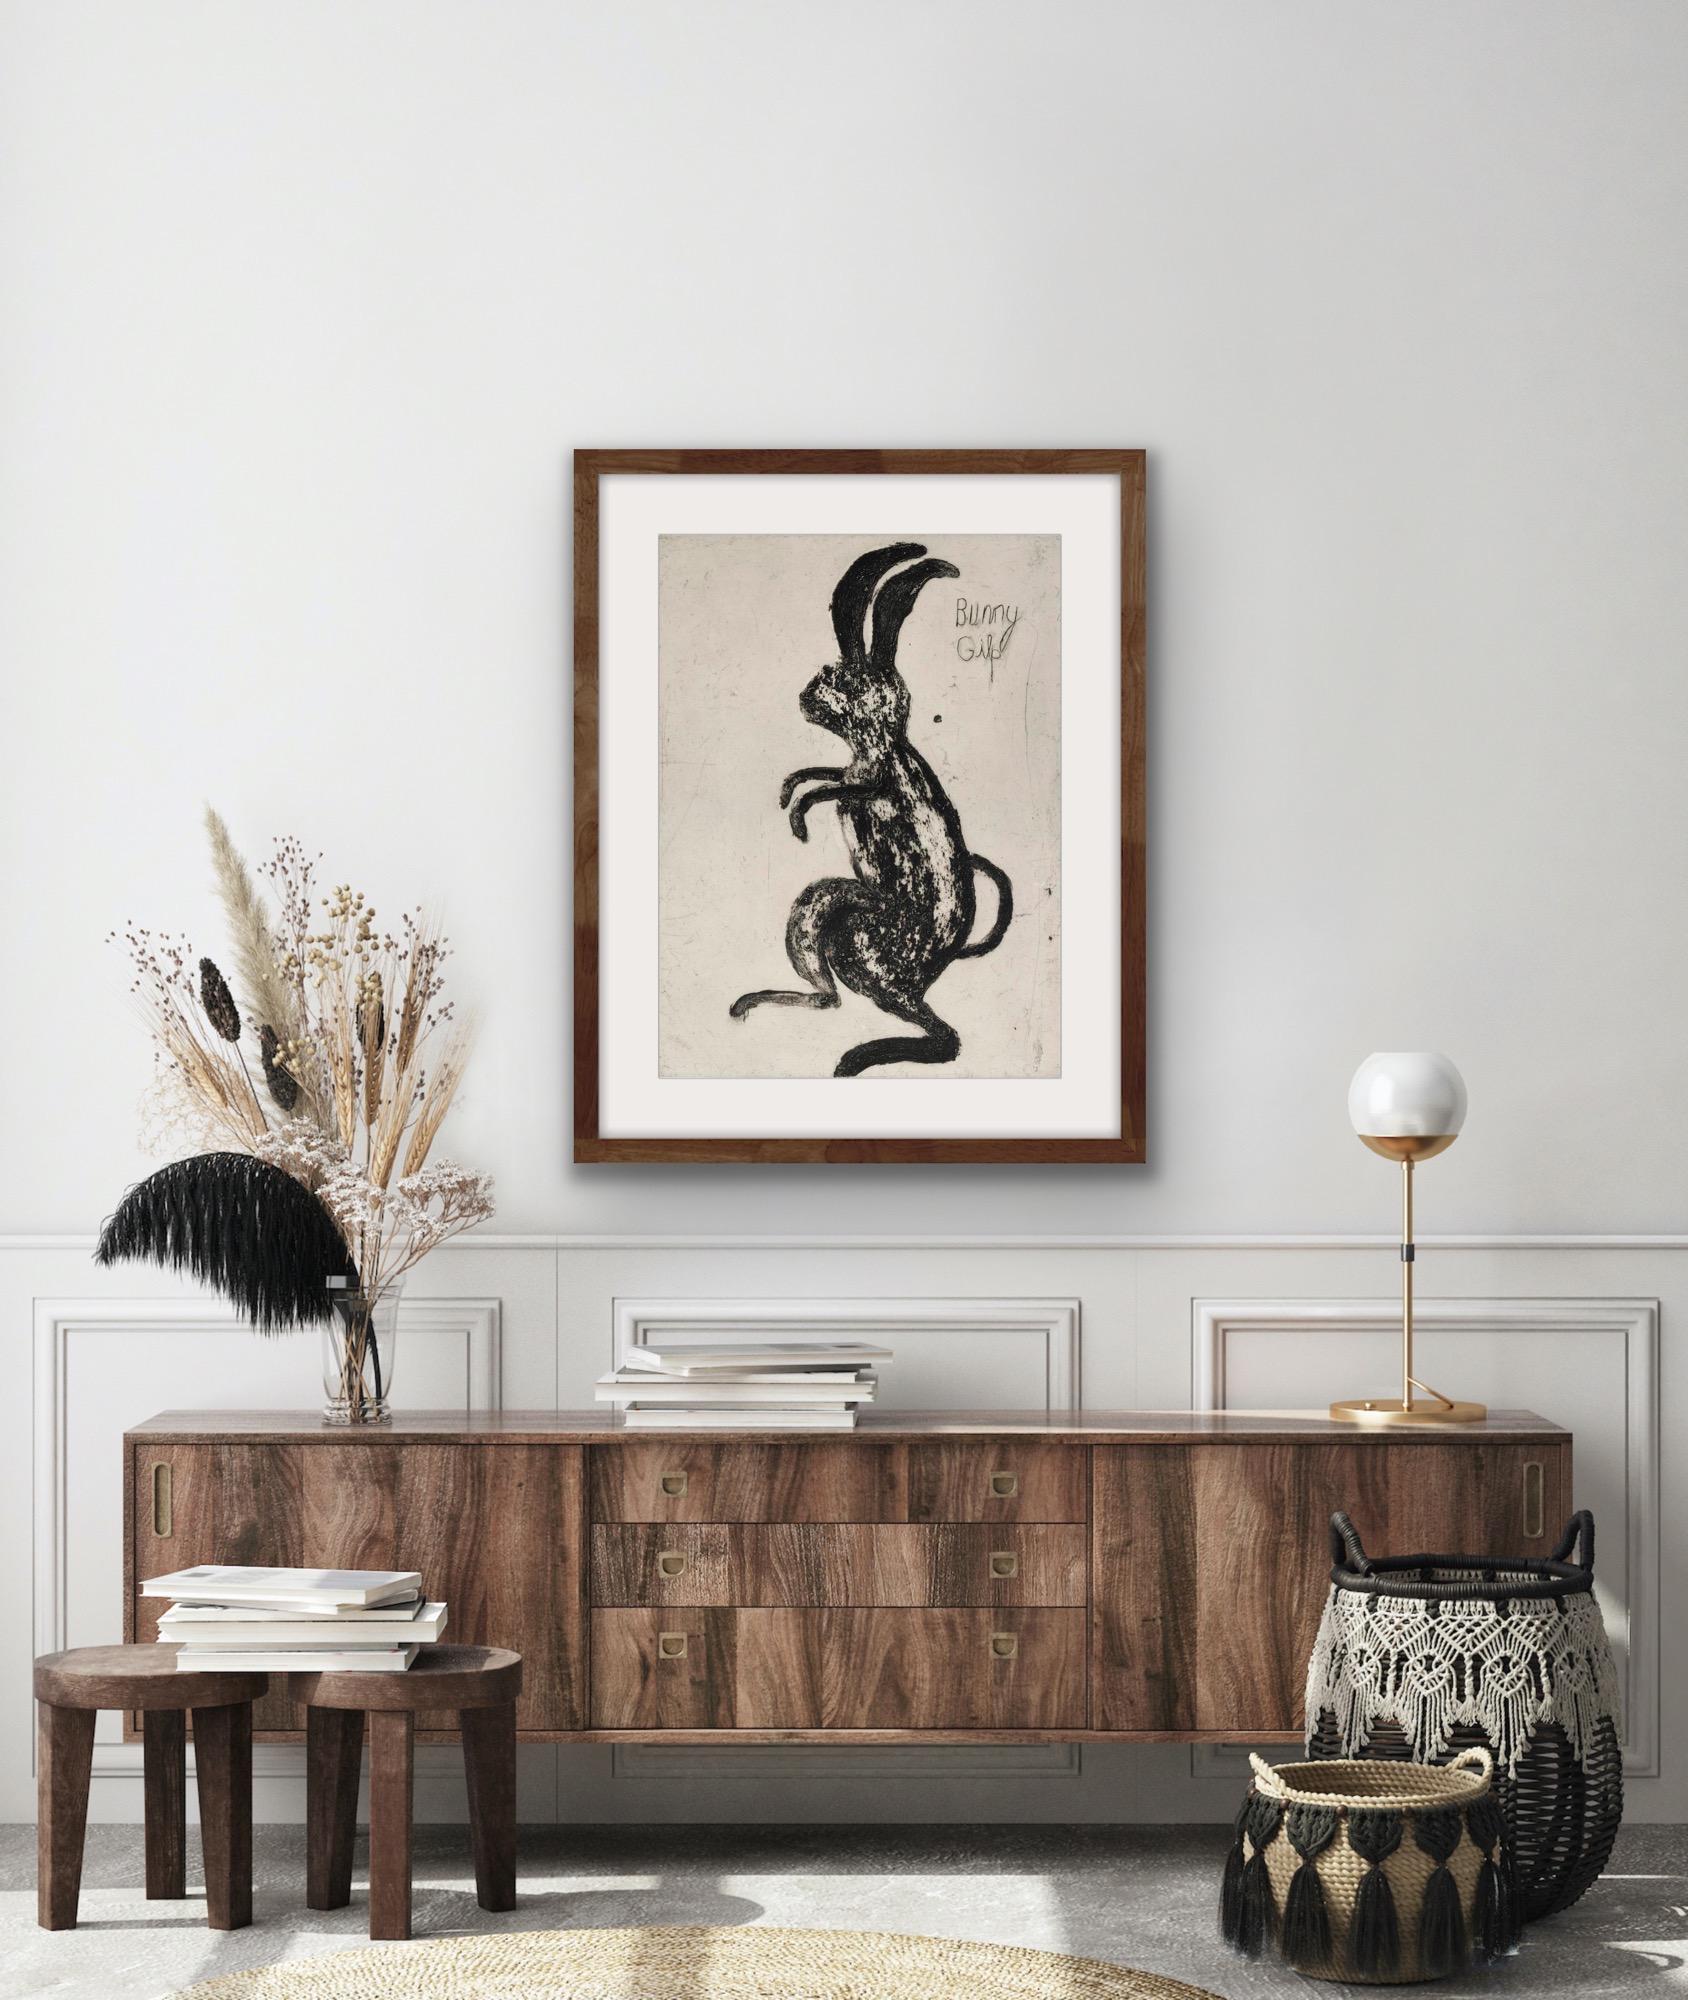 Bunny Gilp, Animal Art, Rabbit Art, Grounded Contemporary Artwork, Word Art - Print by Kate Boxer 